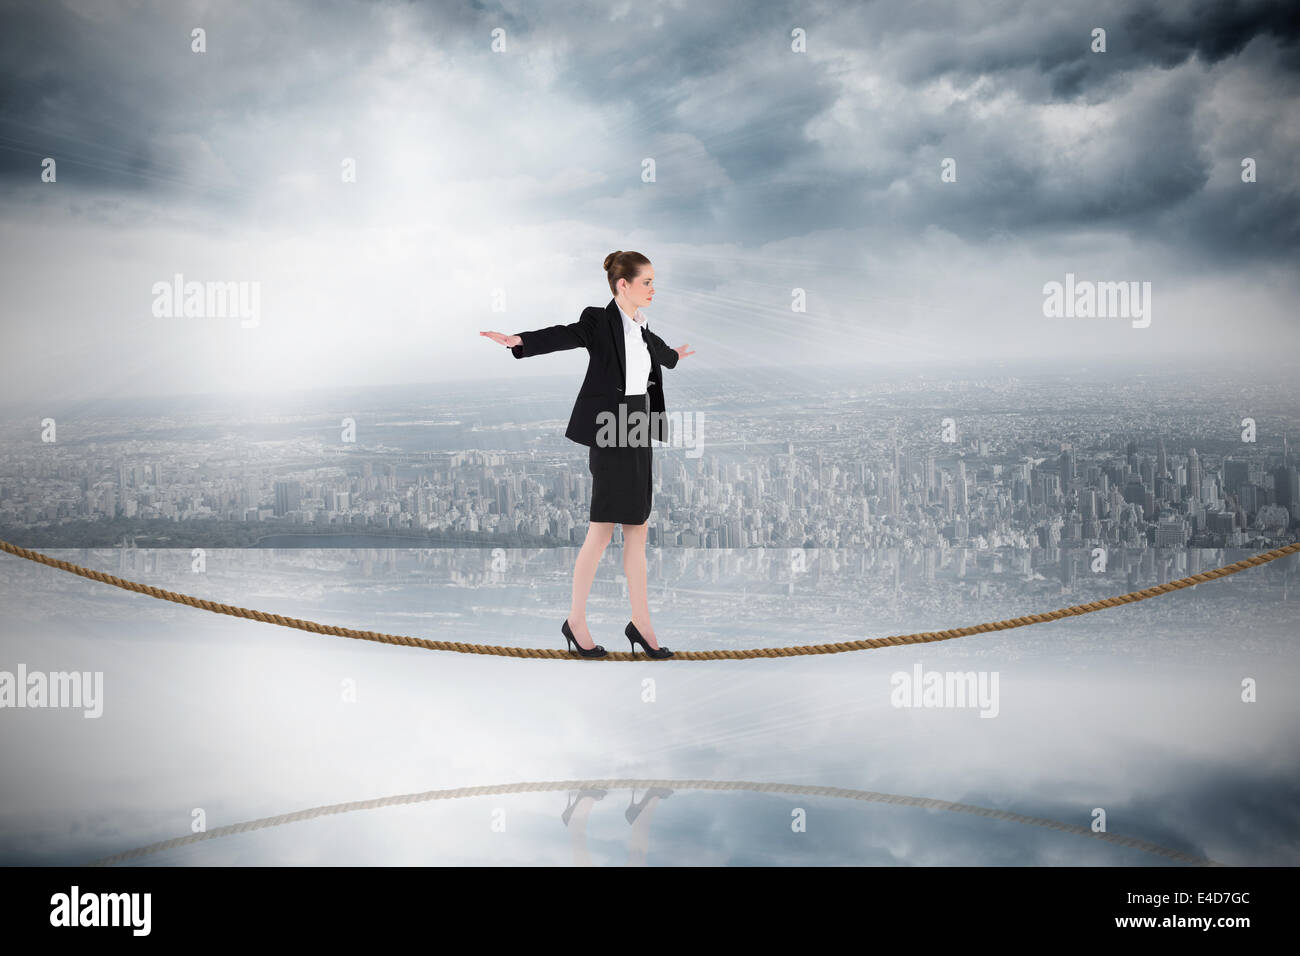 Composite image of businesswoman performing a balancing act on tightrope Stock Photo